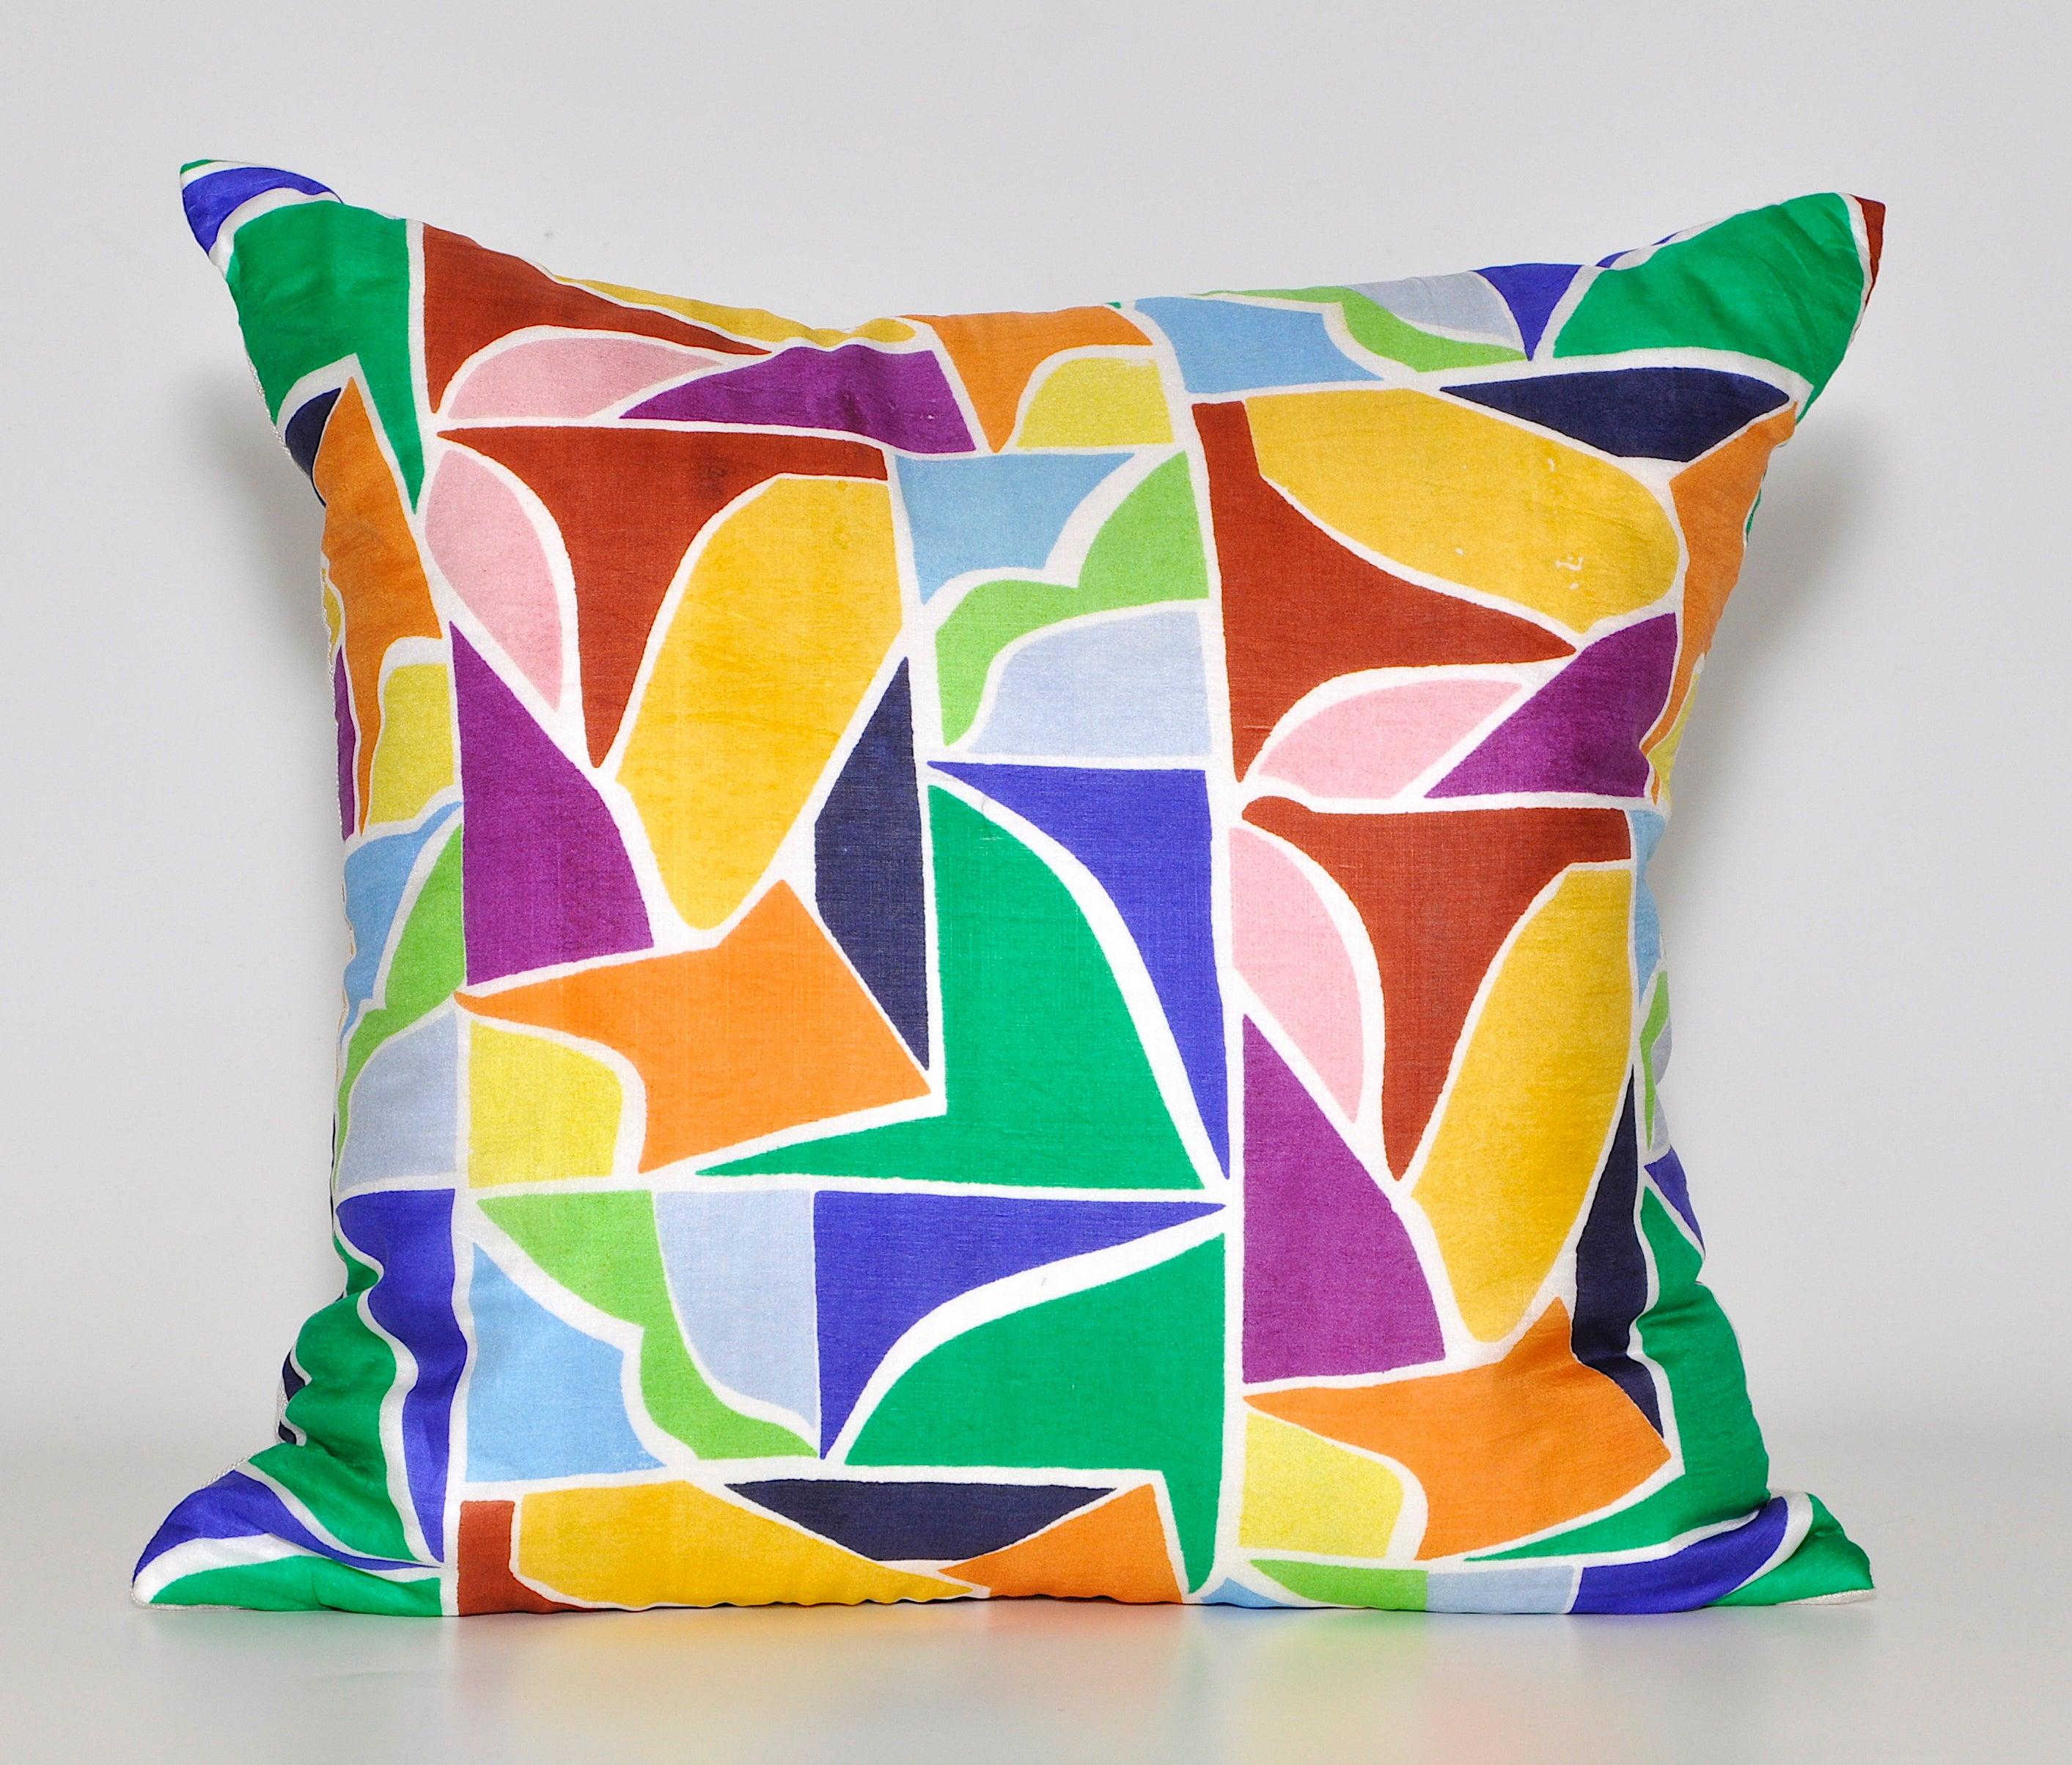 Unique custom made one-of-a-kind cushions (pillows) created from a stunning vintage silk 1960s fashion scarf in an eye catching multicolored geometric pattern. The design is reminiscent of stained glass with strong hues emphasized and brightened by